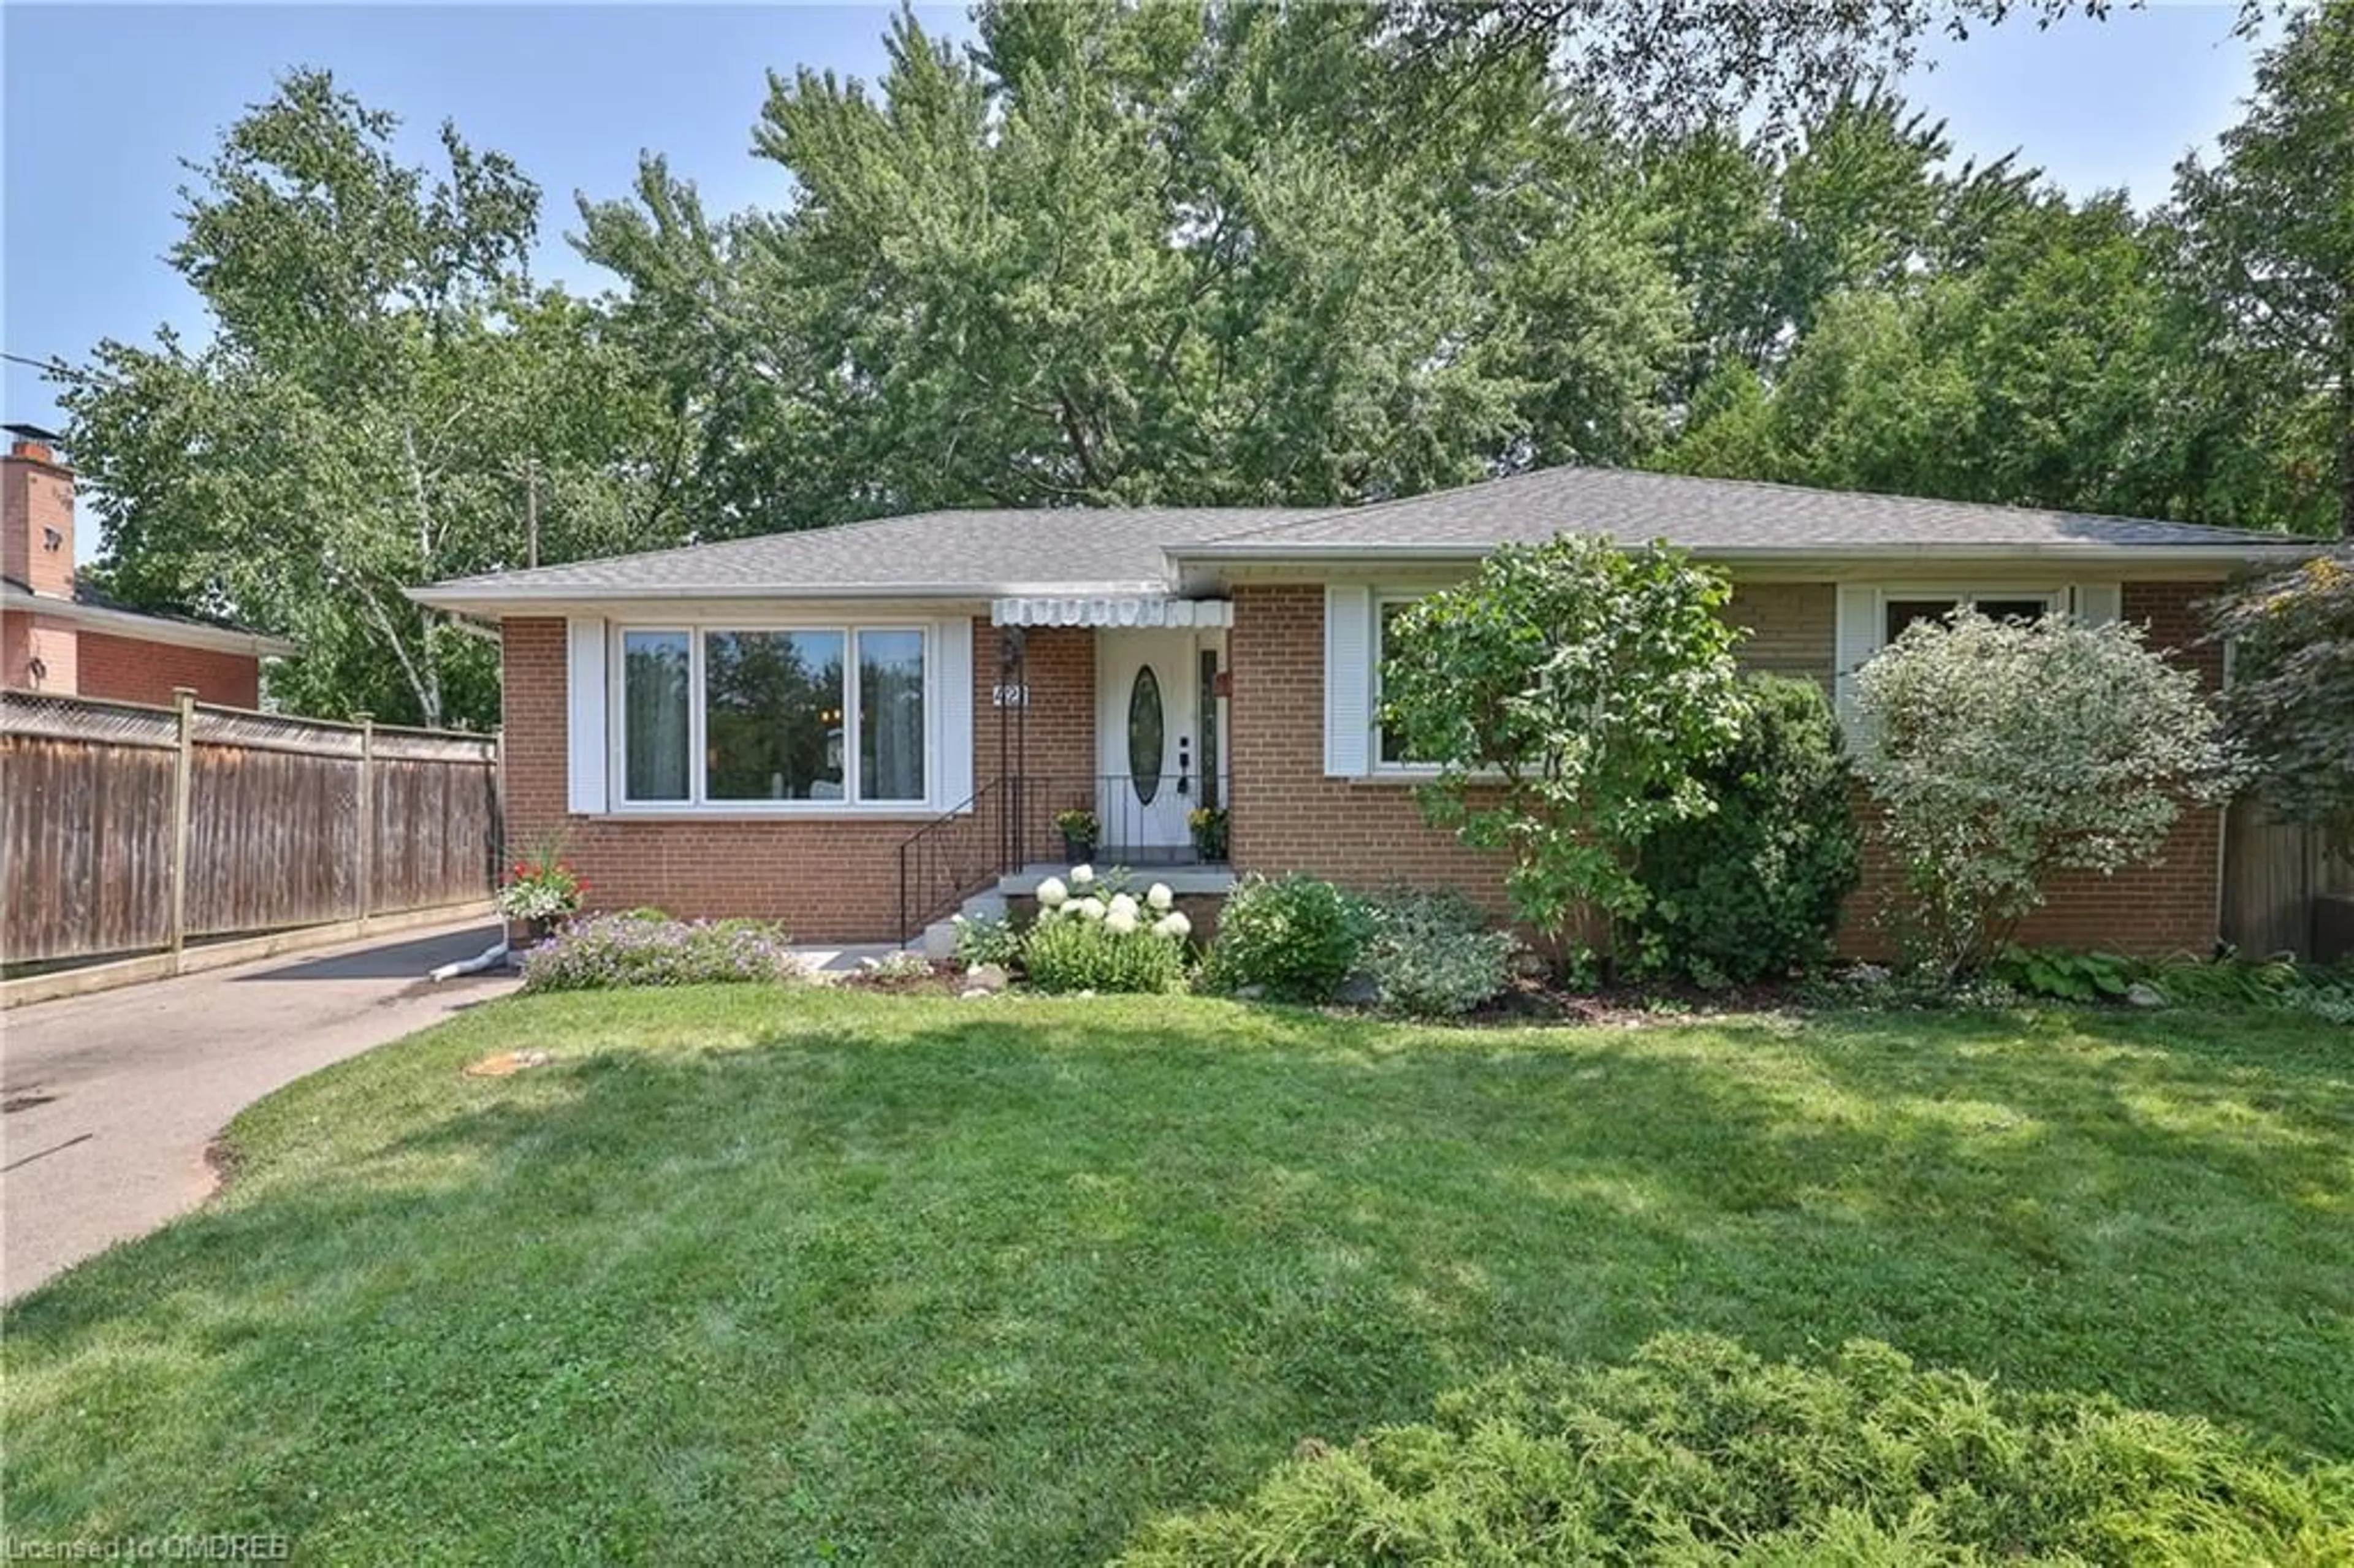 Home with brick exterior material for 421 Seaton Dr, Oakville Ontario L6L 3Y3